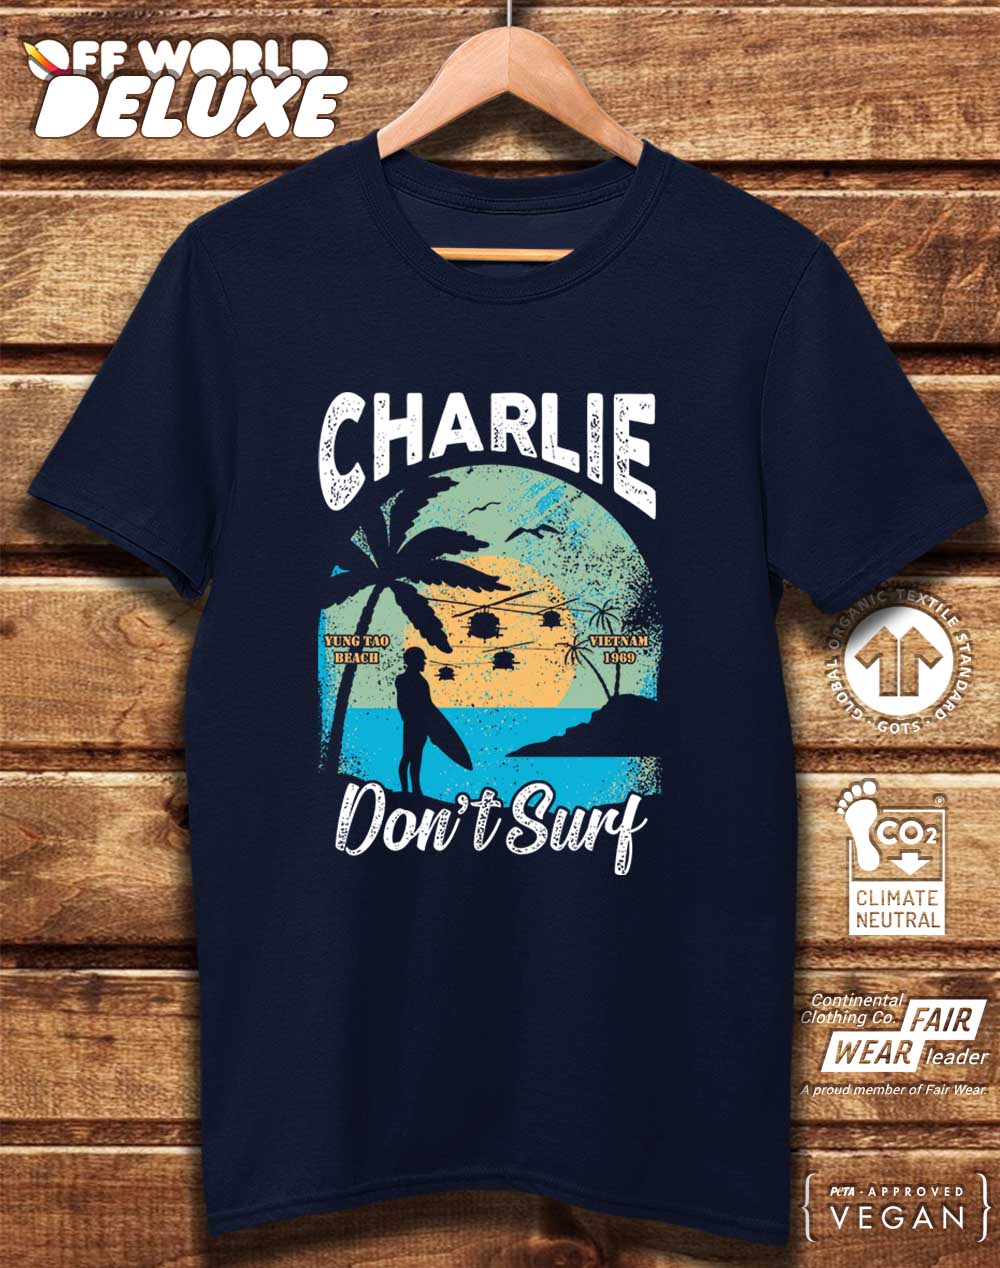 DELUXE Charlie Don't Surf Organic Cotton T-Shirt